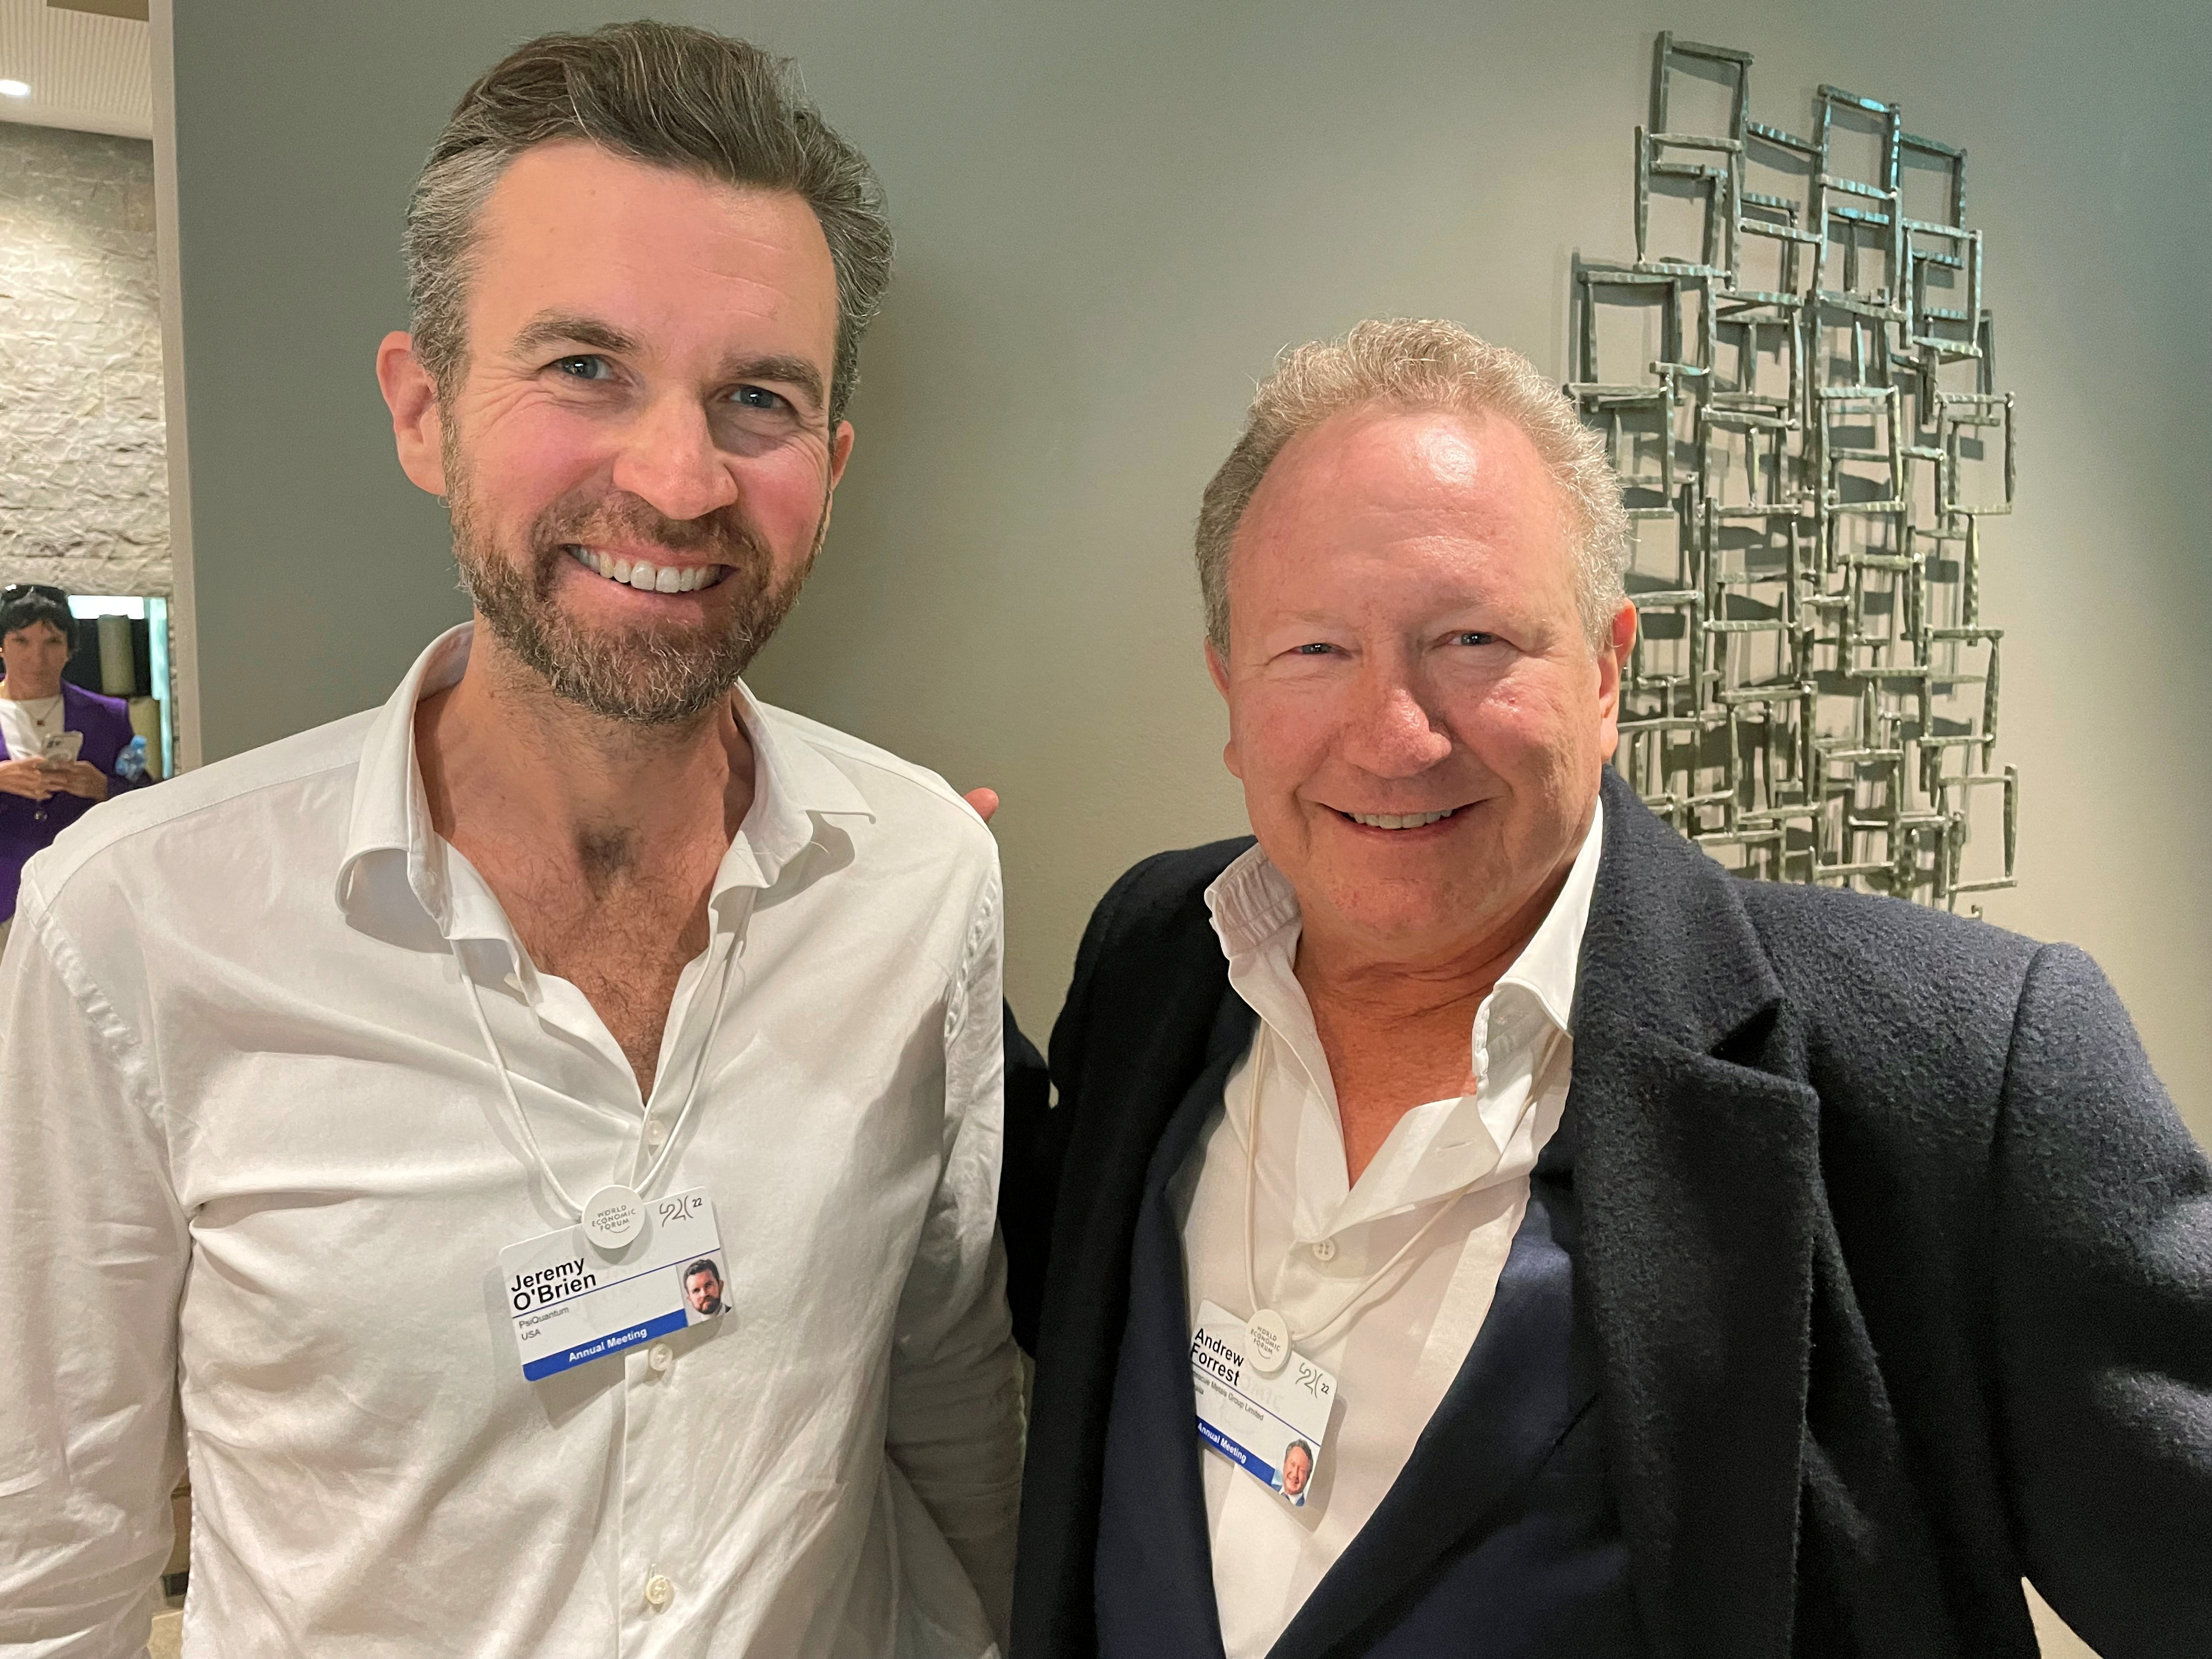 Founder of Australia's Fortescue Metals Group Andrew Forrest poses together with Jeremy O'Brien, co-founder of Silicon Valley-based PsiQuantum in the Alpine resort of Davos